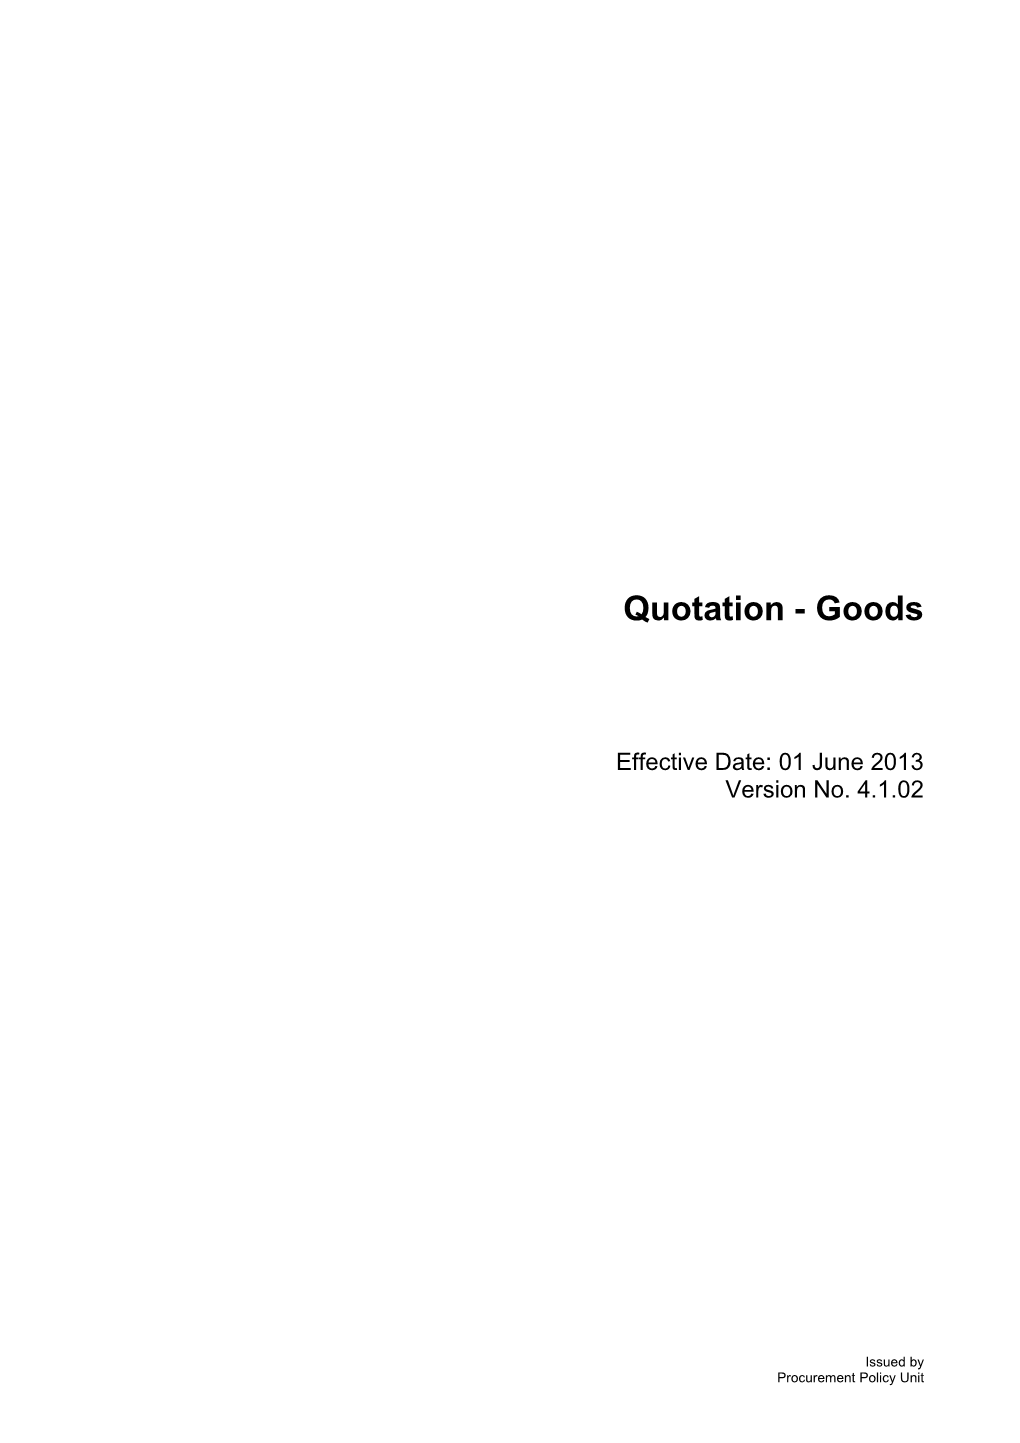 Conditions: Quoting and Contract Quotation - Goods